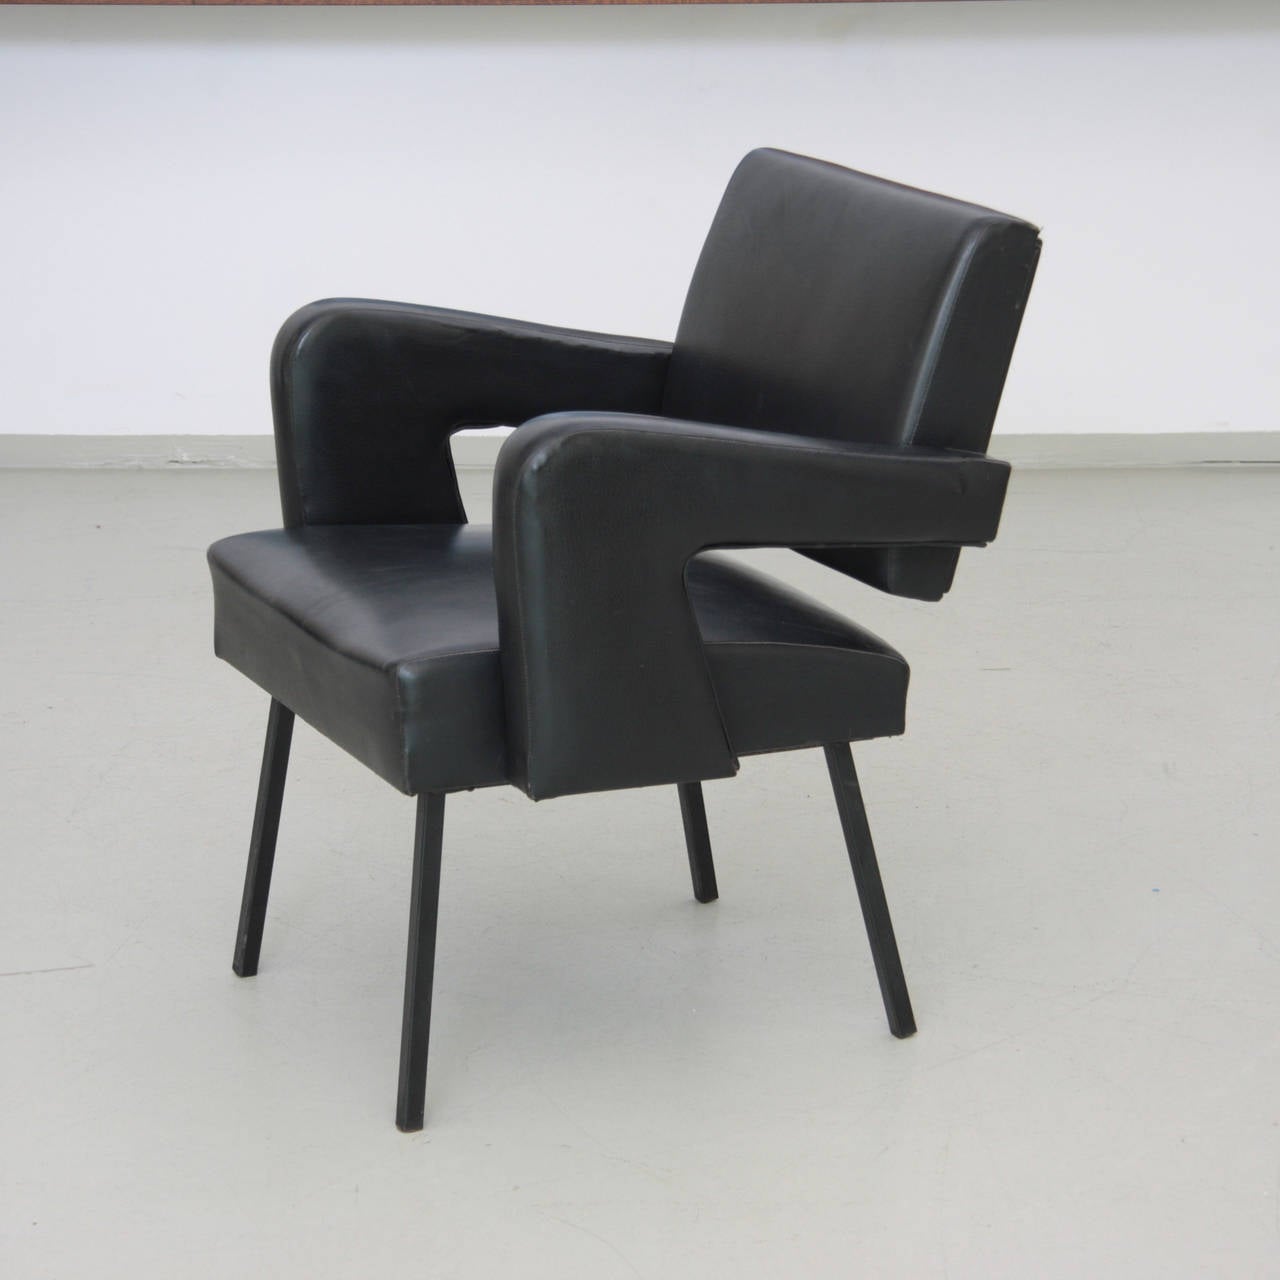 French Jacques Adnet Armchair in Black Vinyl Original Condition For Sale